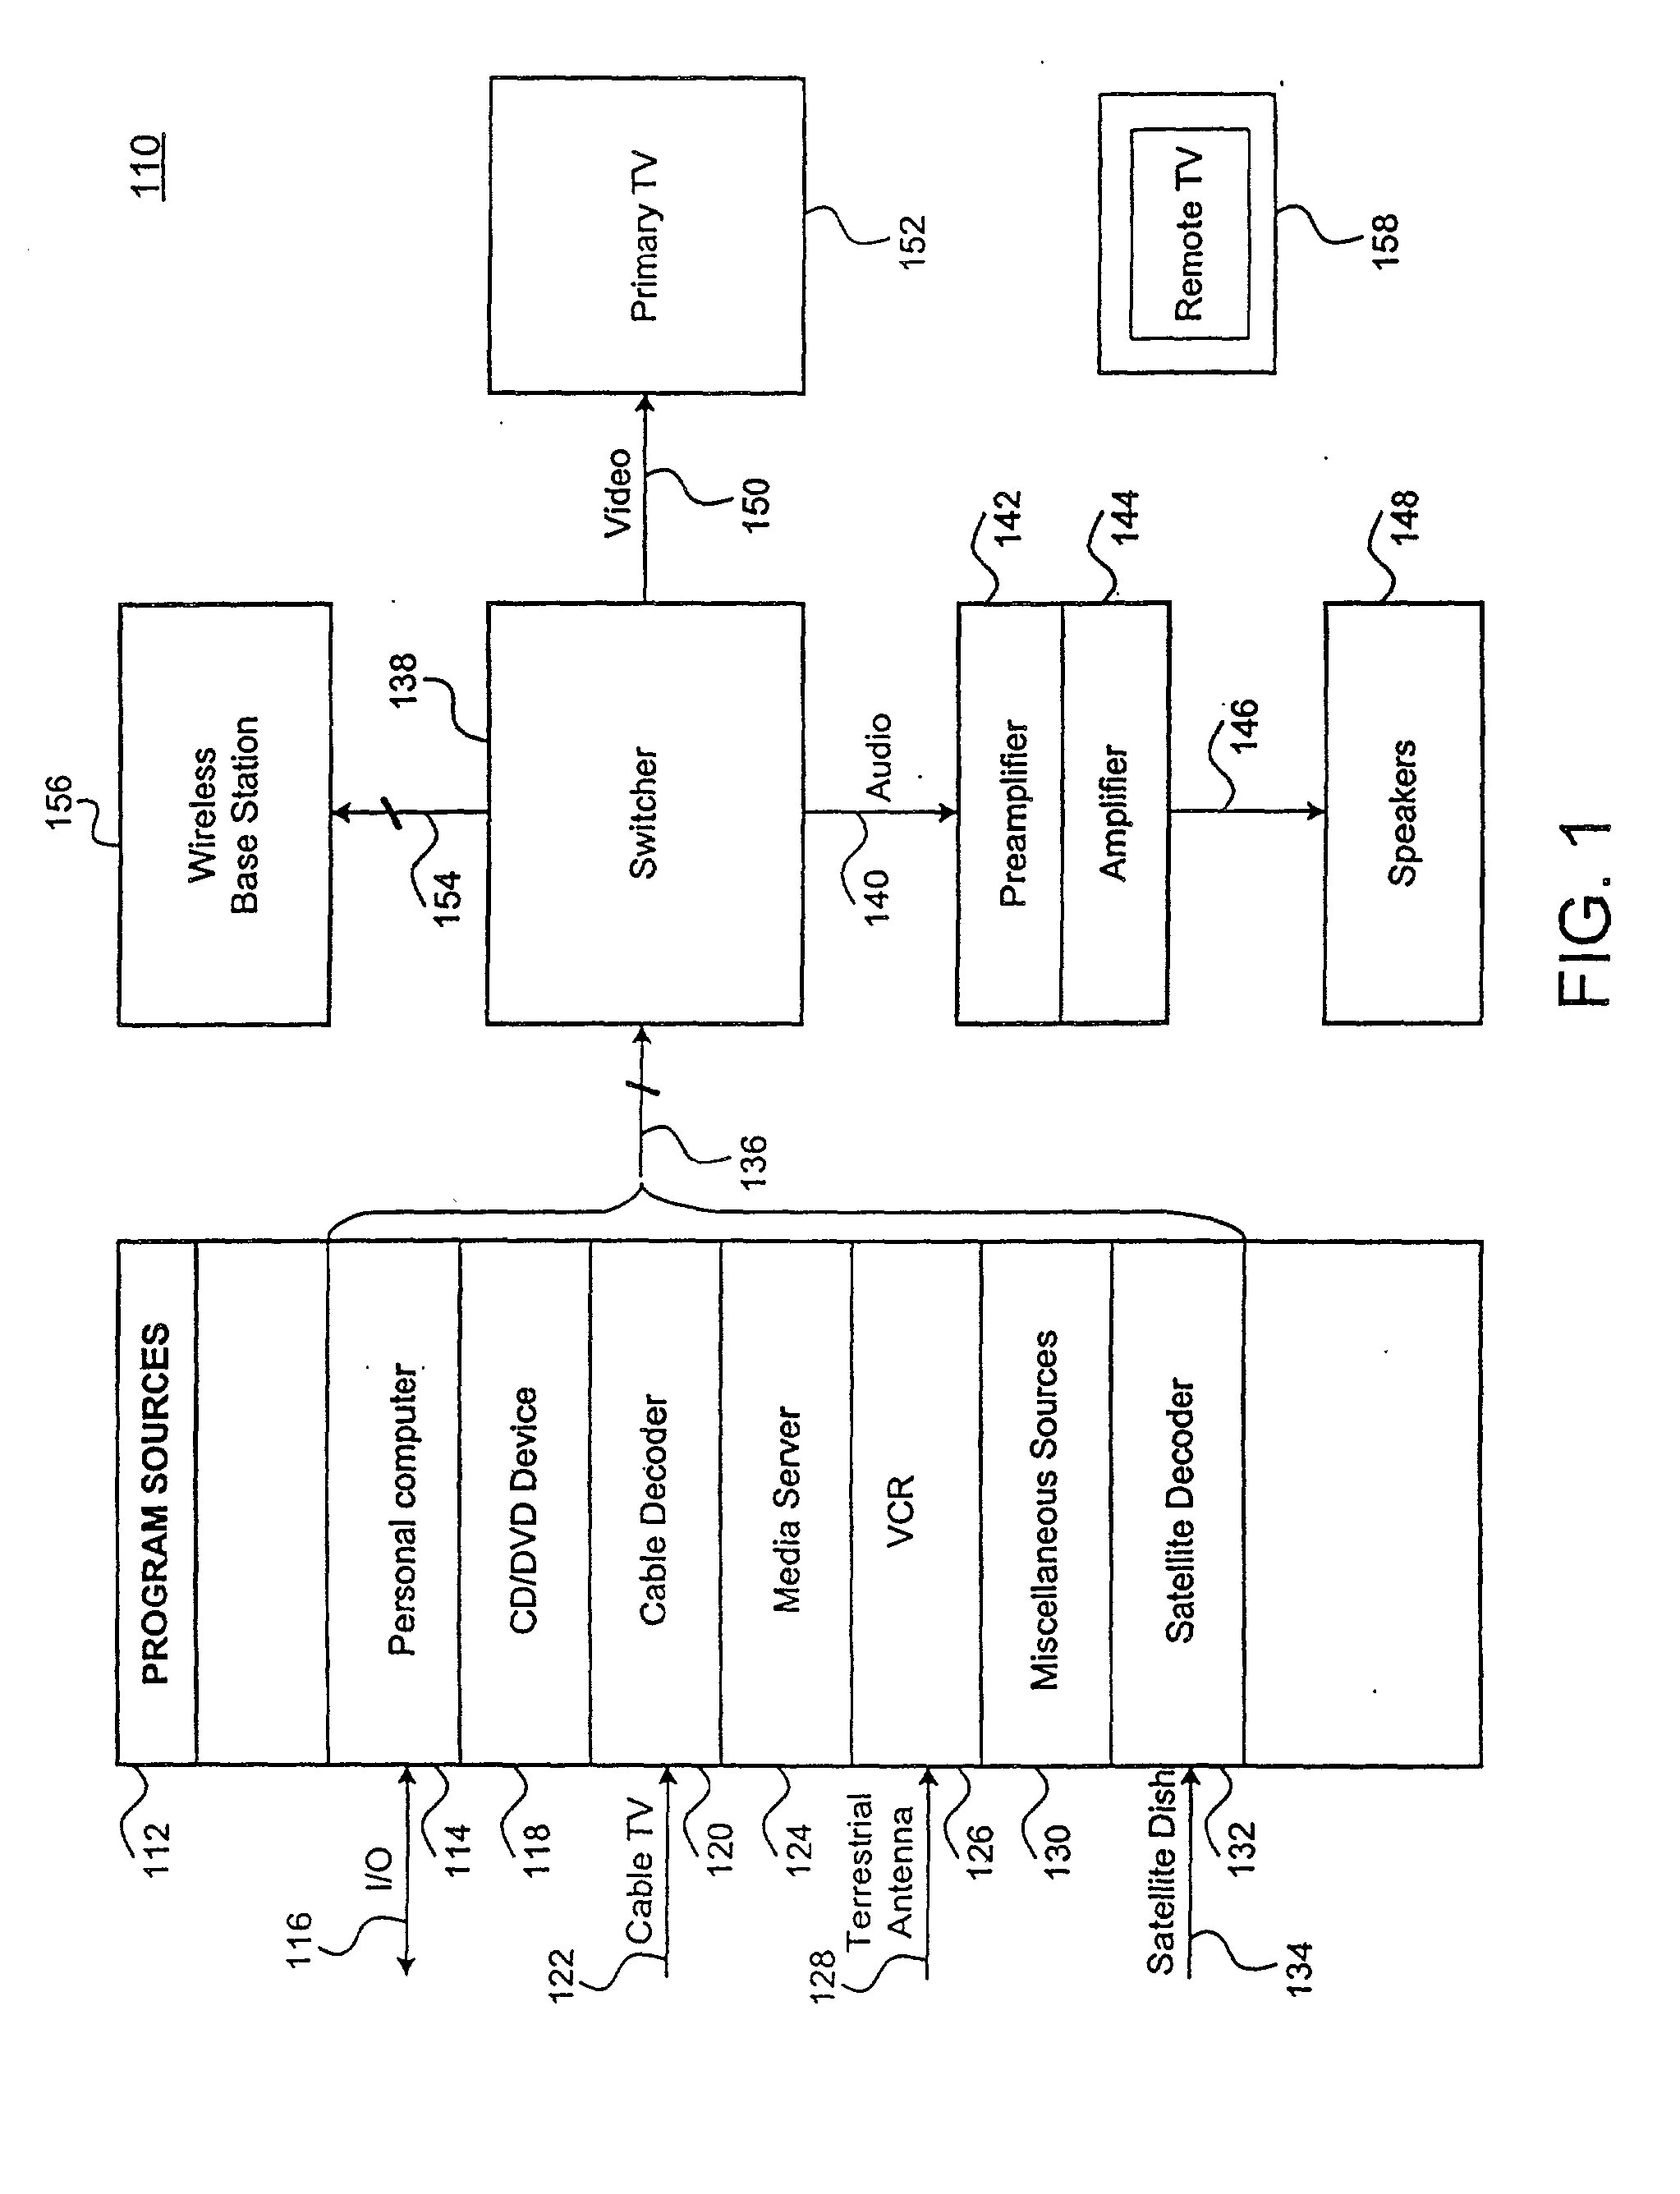 Apparatus and method for effectively implementing a wireless television system